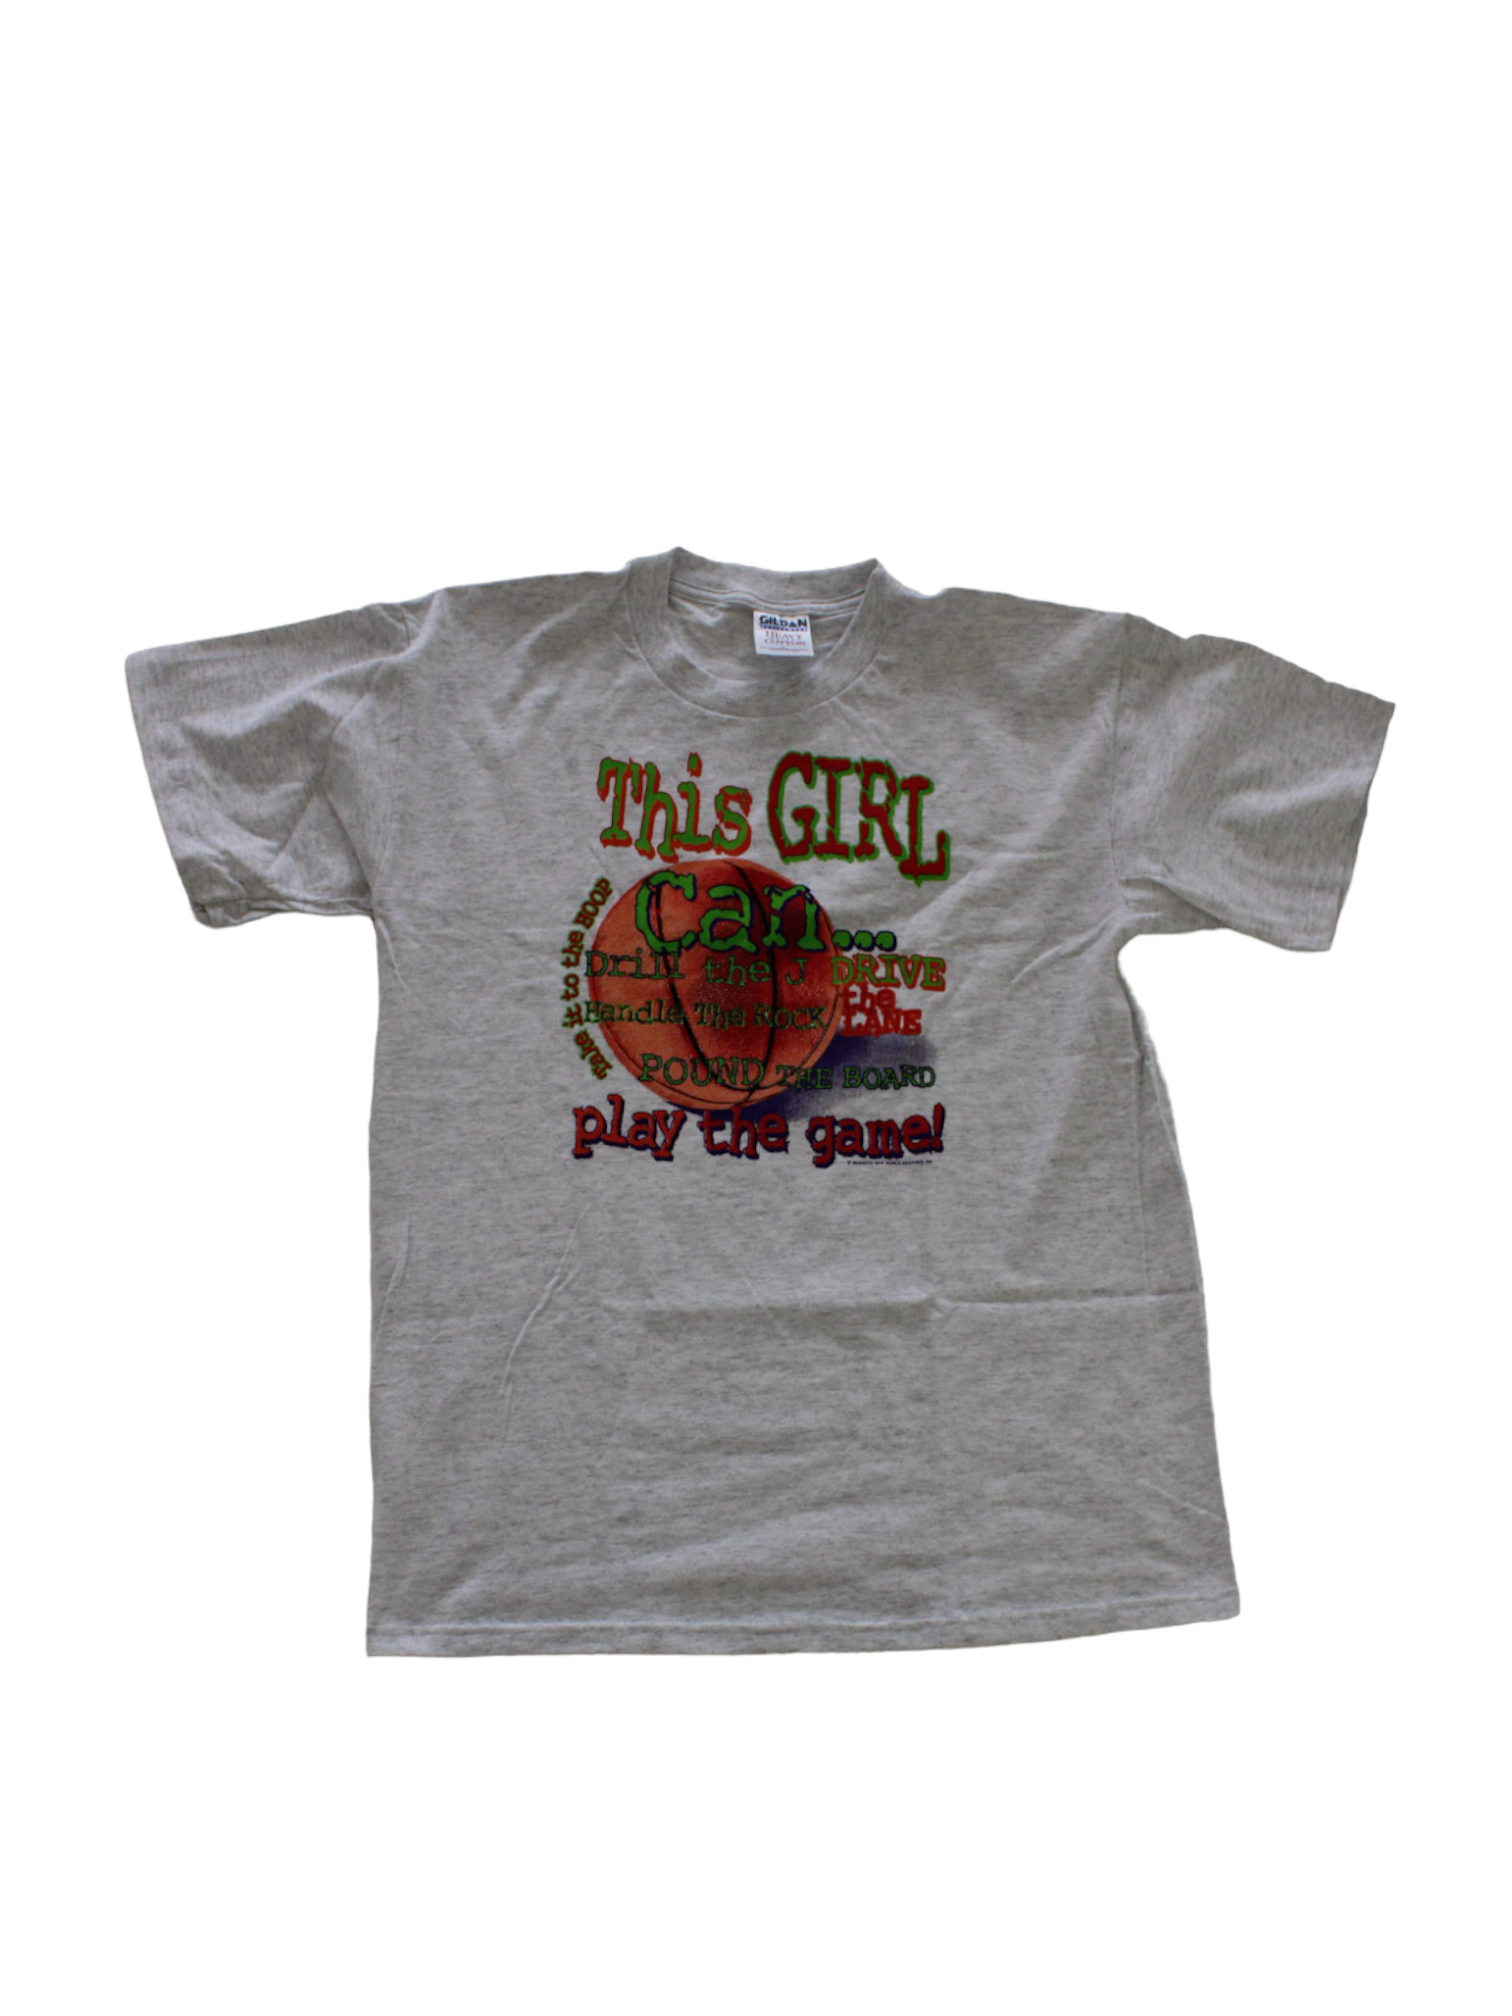 Vintage 90s 'This girl can play' T-Shirt